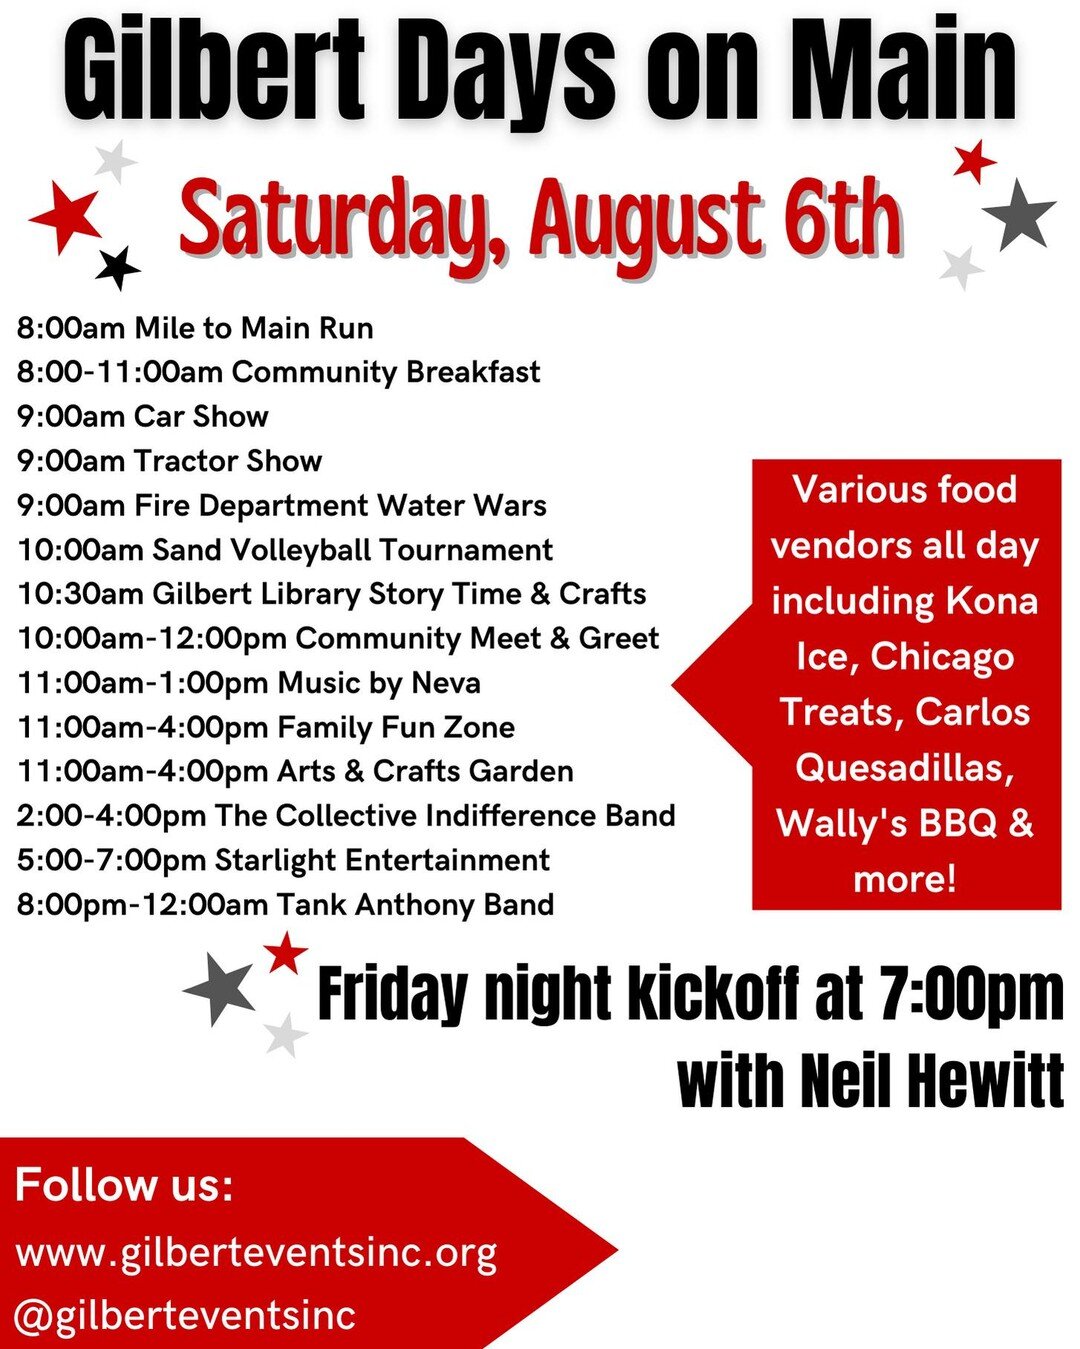 Come out to Main Street in Gilbert, IA on Saturday and enjoy these amazing activities for all families and ages during Gilbert Days on Main!🍉🤩🍺🎡 We have food, inflatables, crafts, tournaments, live music &amp; more❗️

#gilbertdays #gilbertdaysonm